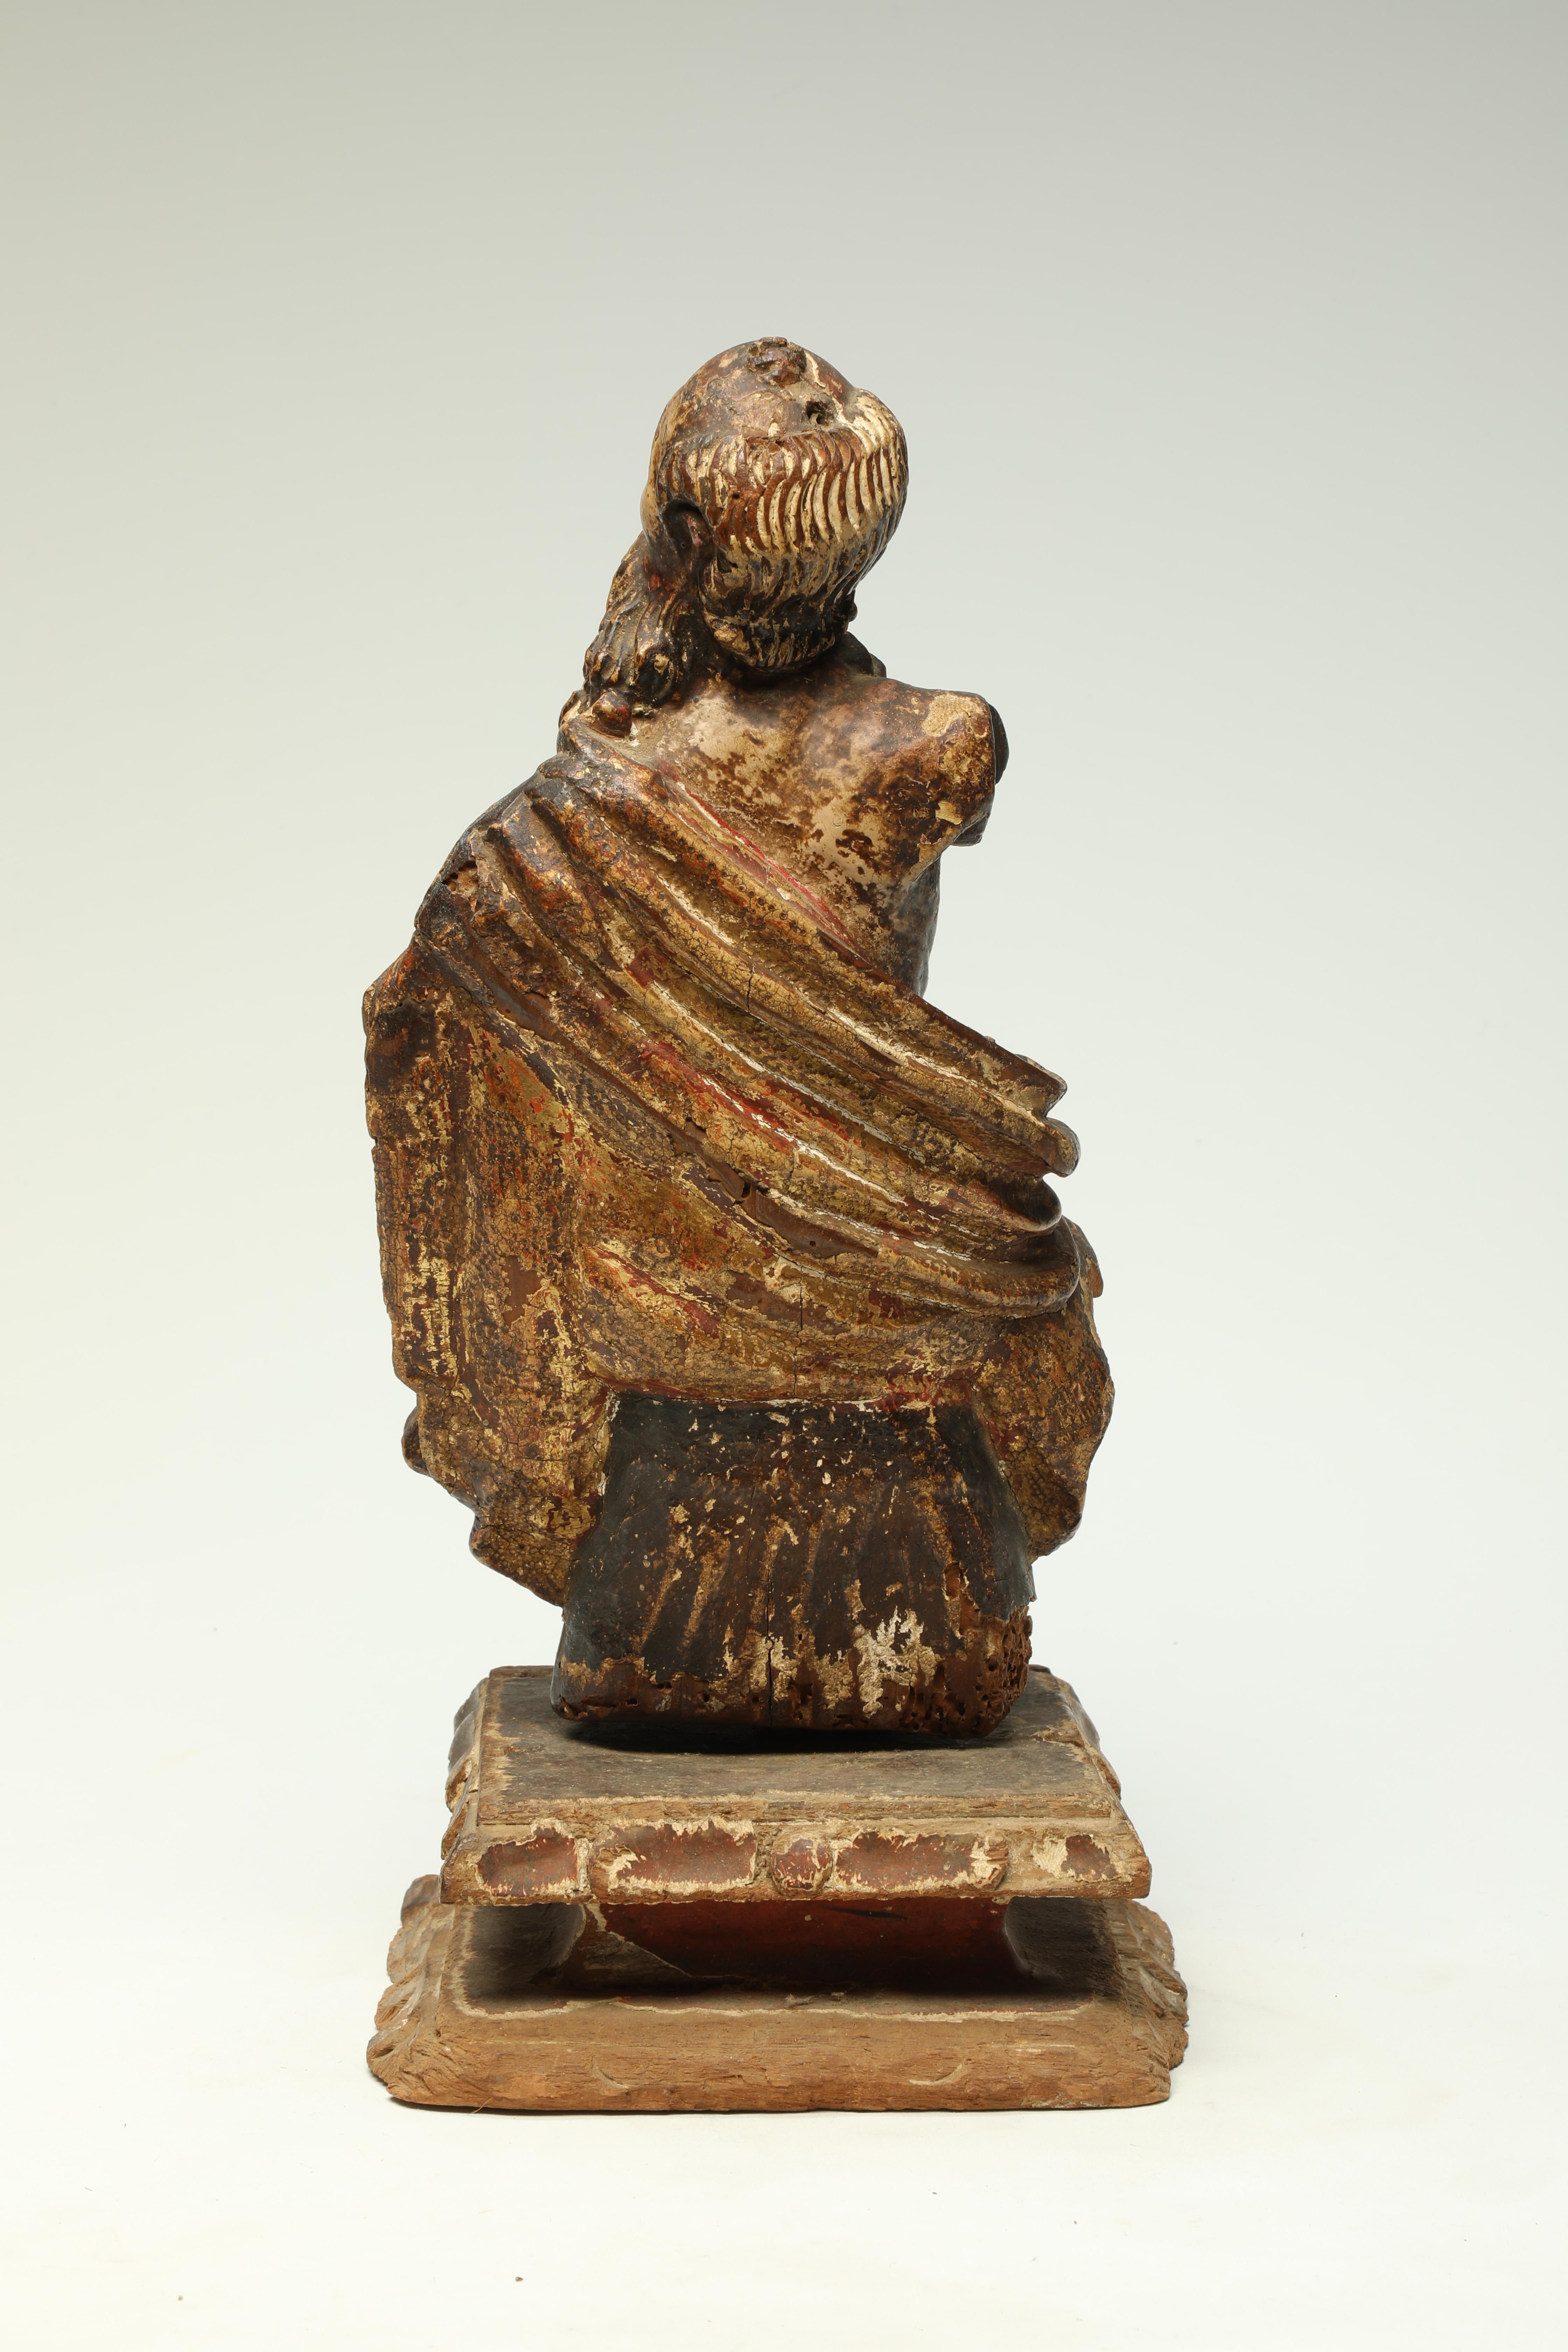 Antique 17th-18th Century Wood Italian Seated Saint Figure Fragment with Beard For Sale 3